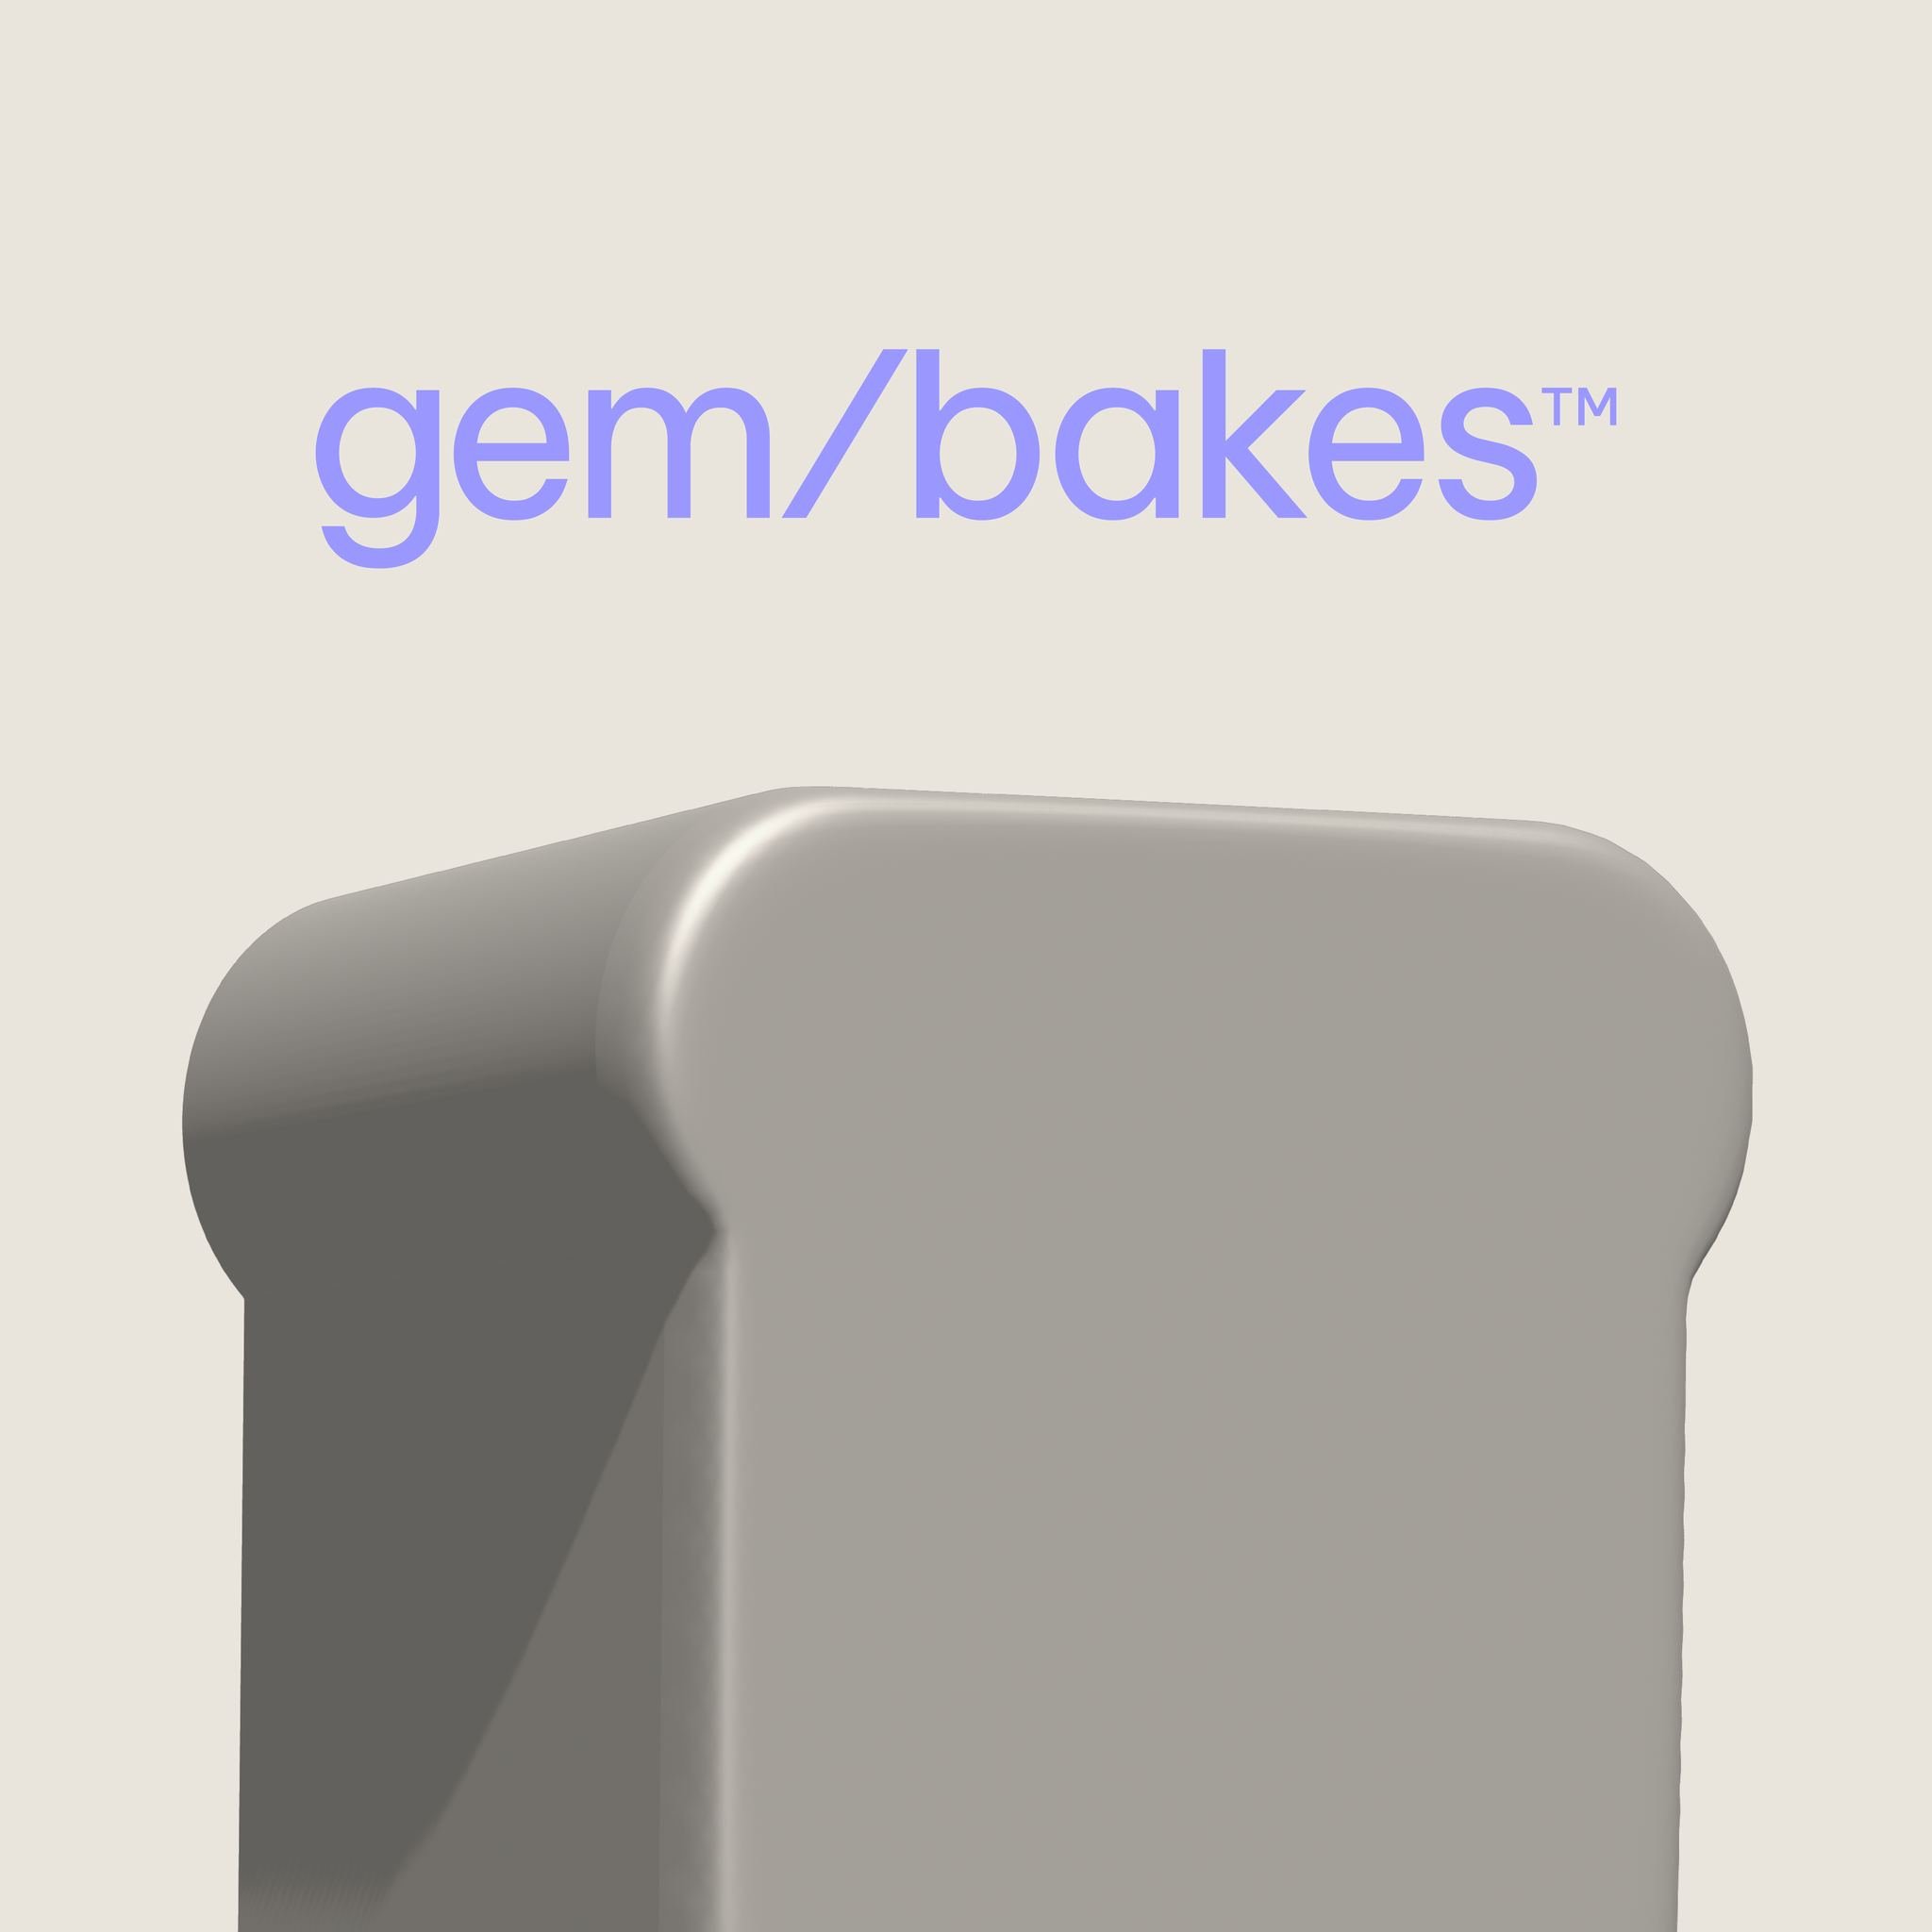 The new kid on the block might actually be gluten intolerant. But he still knows what you &quot;knead&quot;, and how to bake it for you. 

gem/bakes&trade; opening soon.

#closedcaptionscommunications